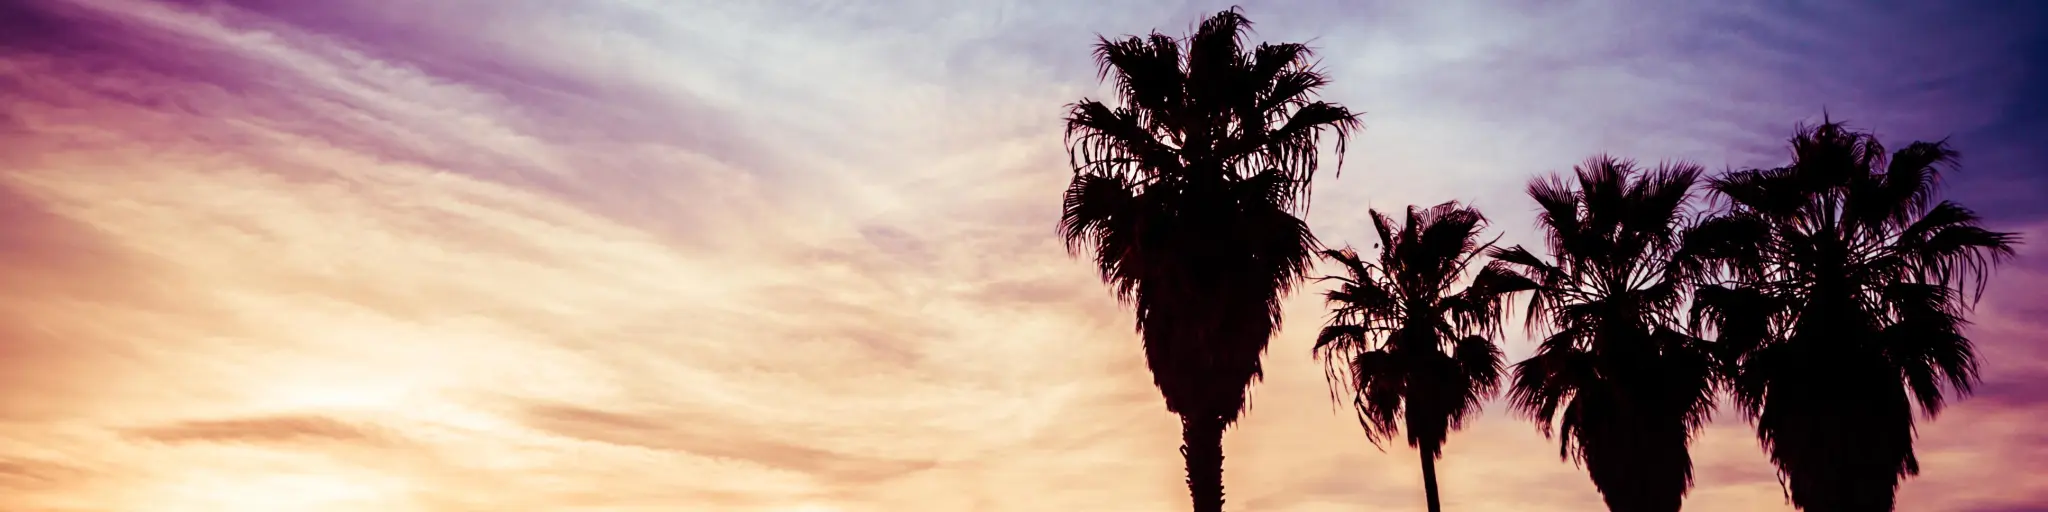 Sunset at Venice Beach with palm trees in the foreground